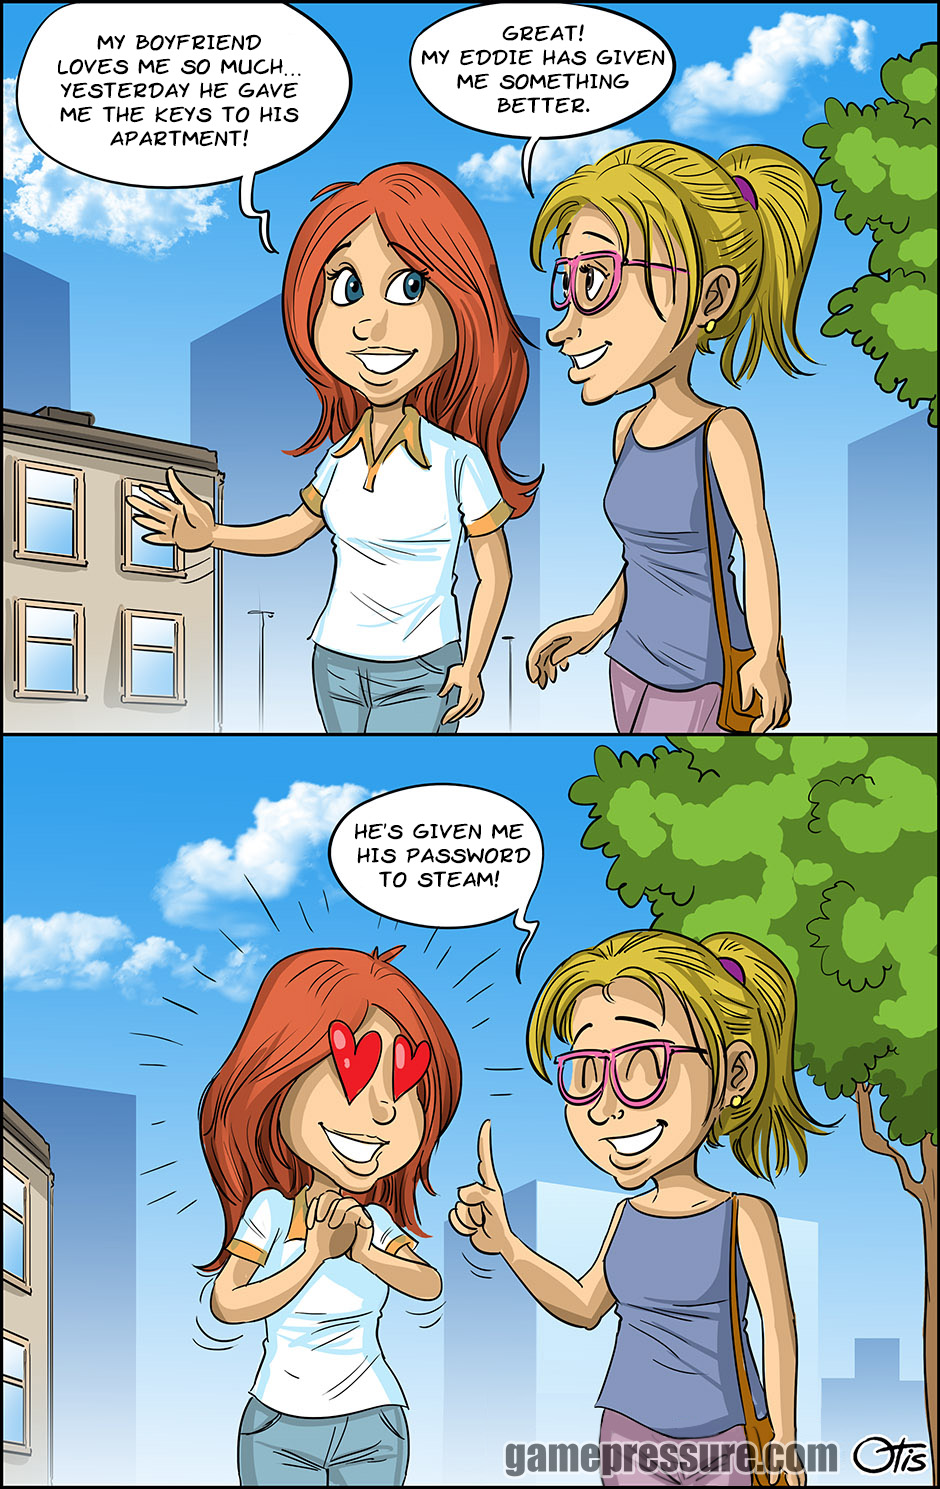 The best kind of gamer boyfriend, comics Cartoon Games, #217. Gamer ladies will probably agree - this is true love!